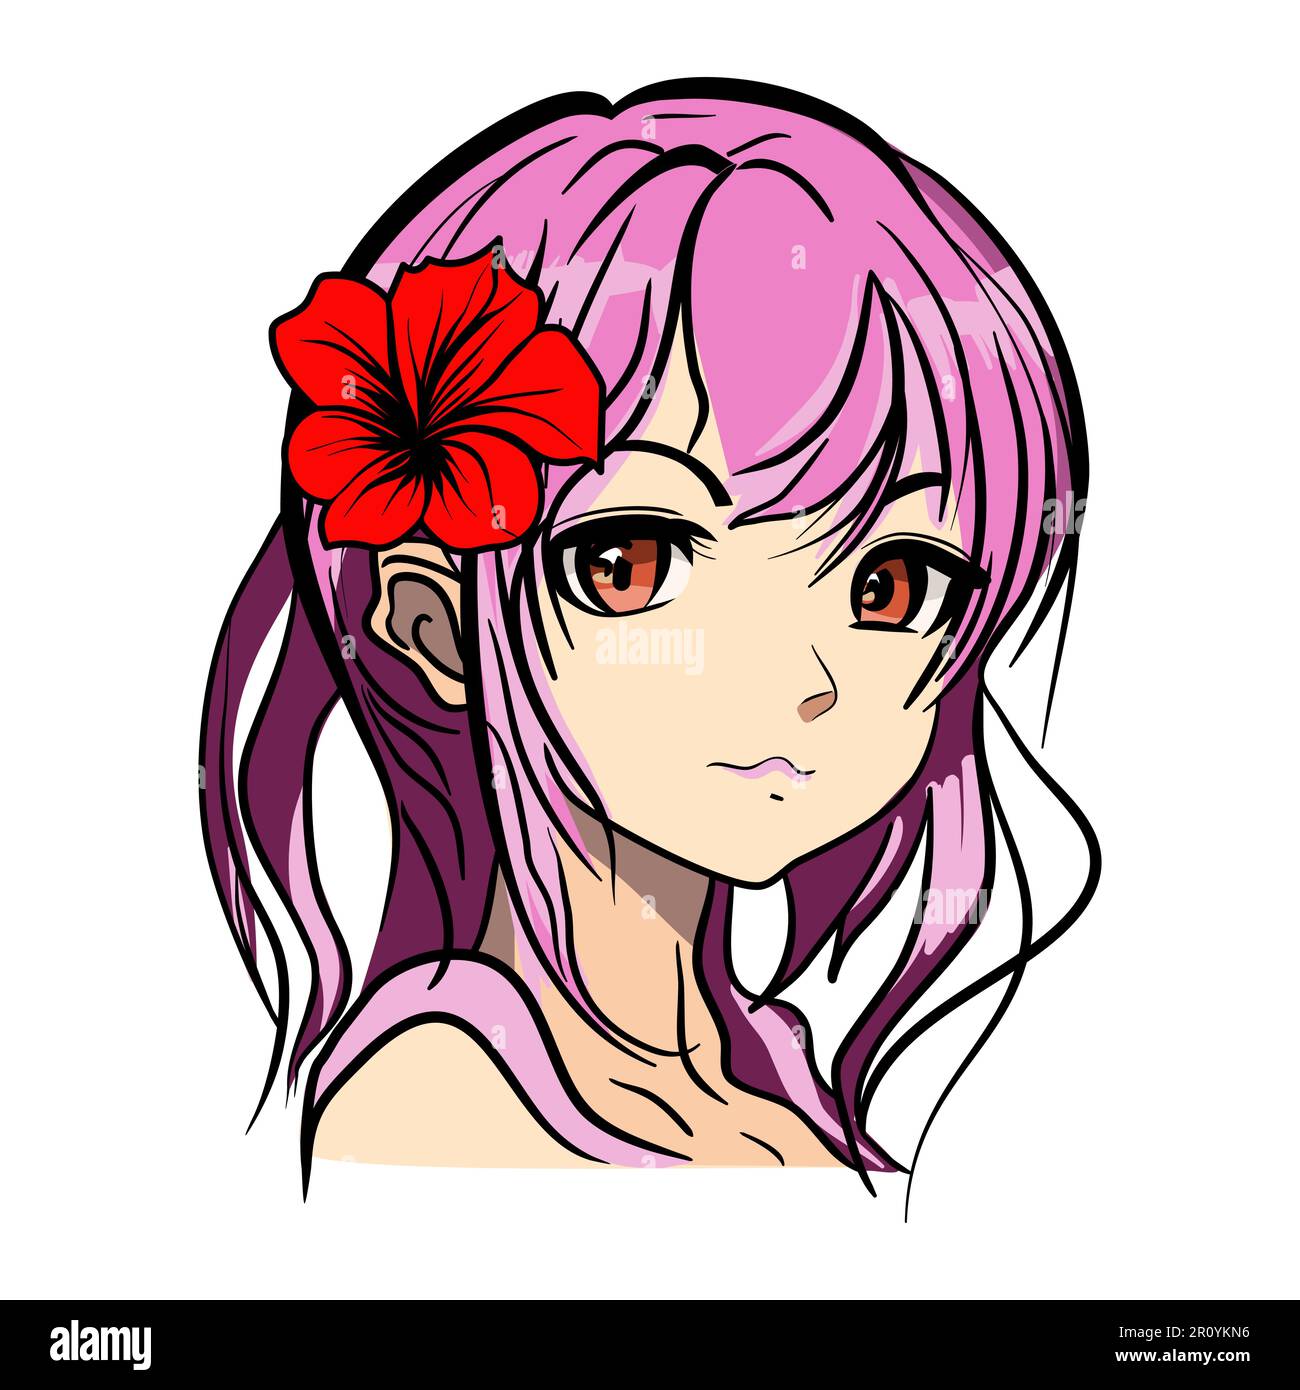 Cute Anime Girl with Purple Eyes and Pink Hair Stock Vector